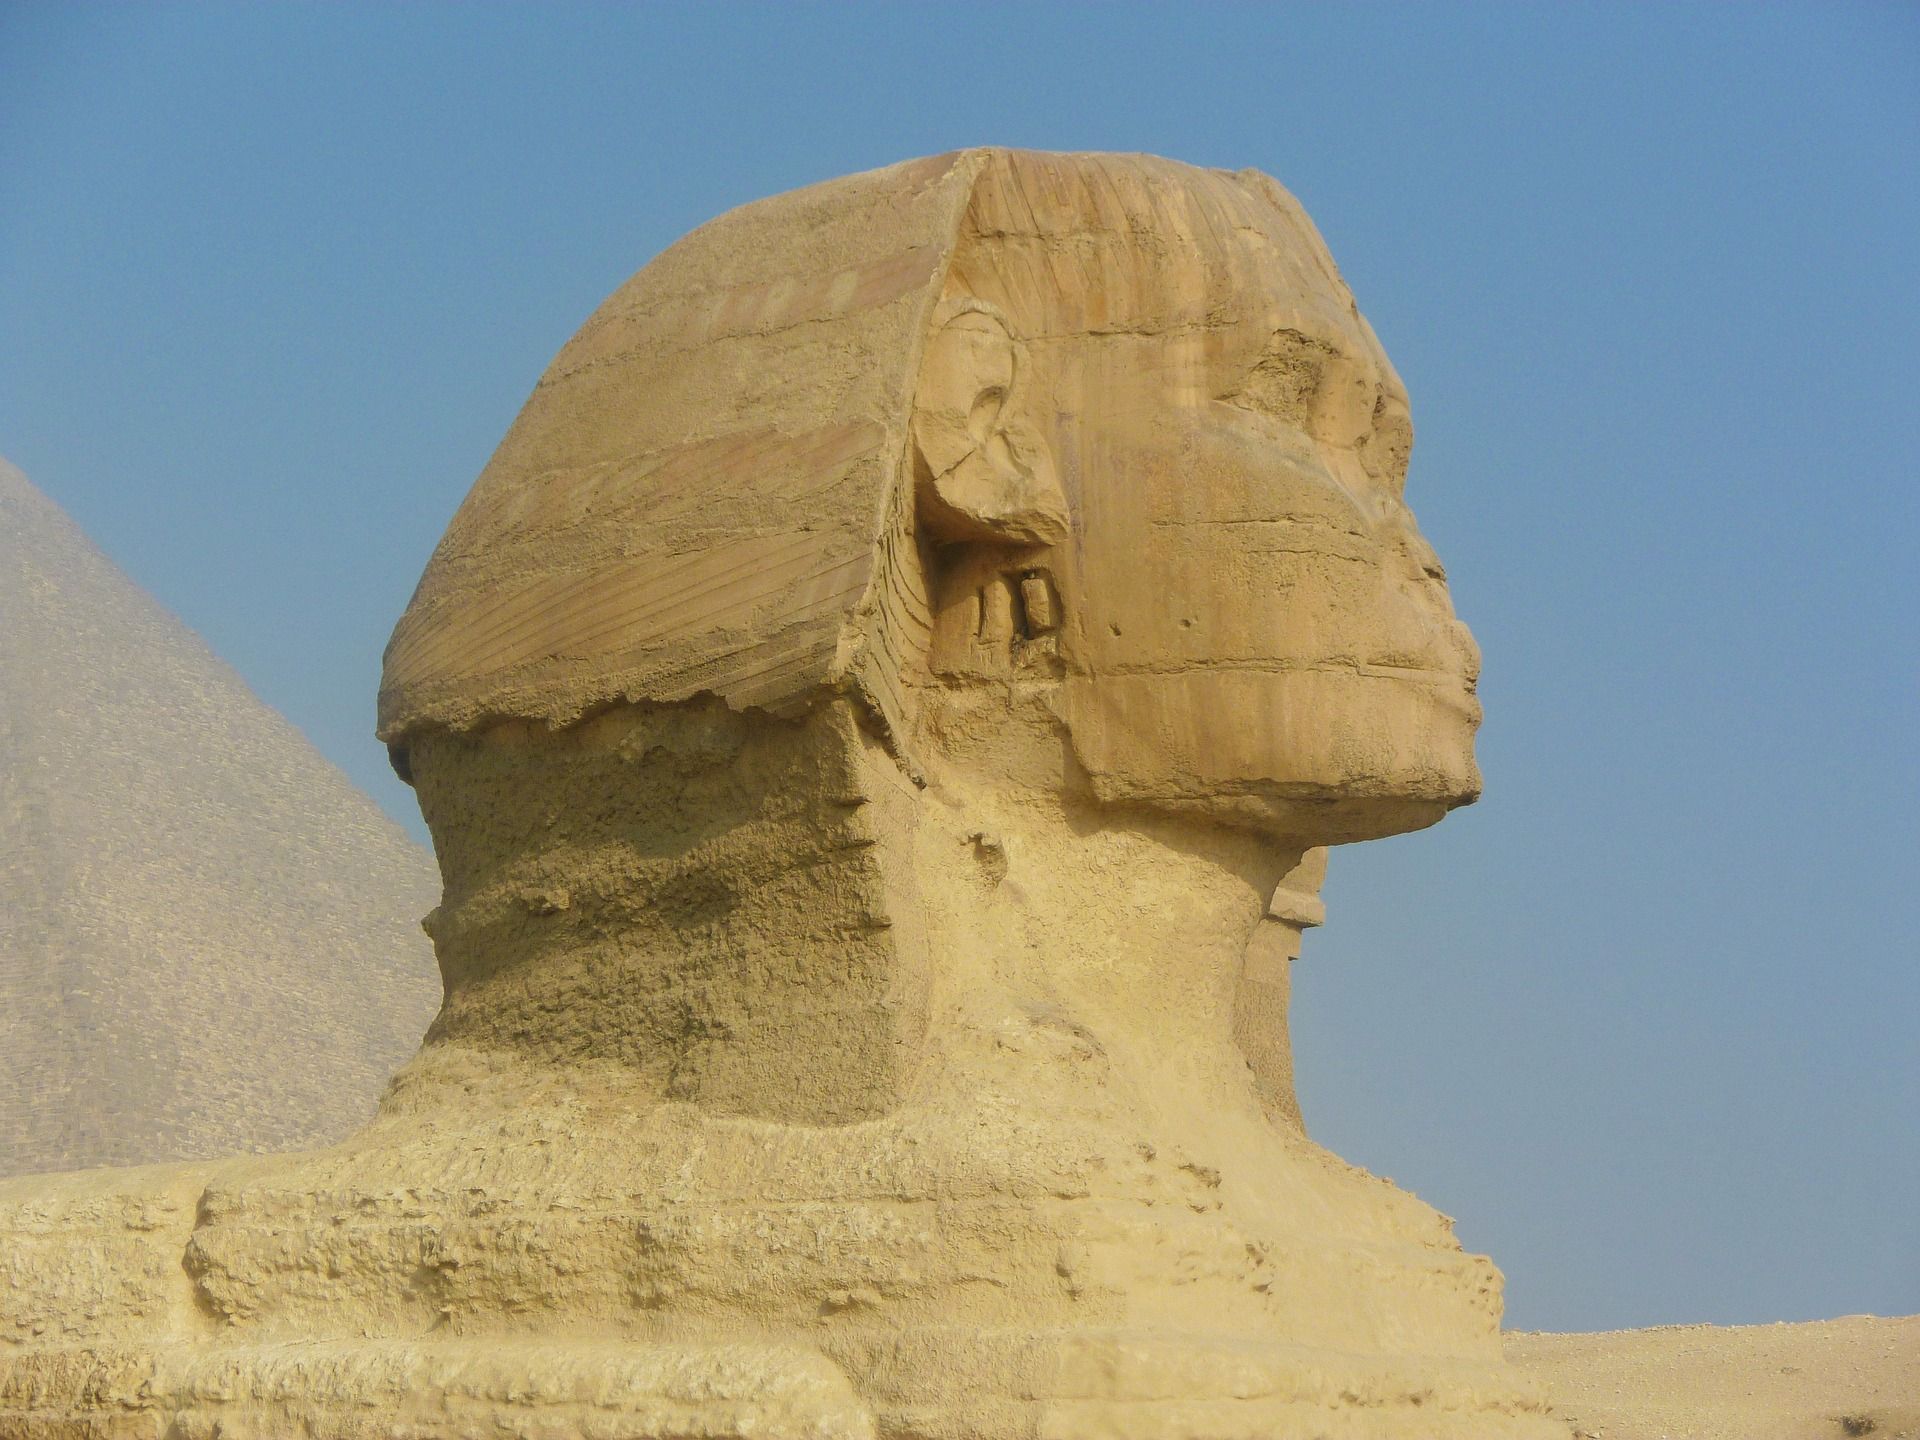 A close view of the Great Sphinx of Giza